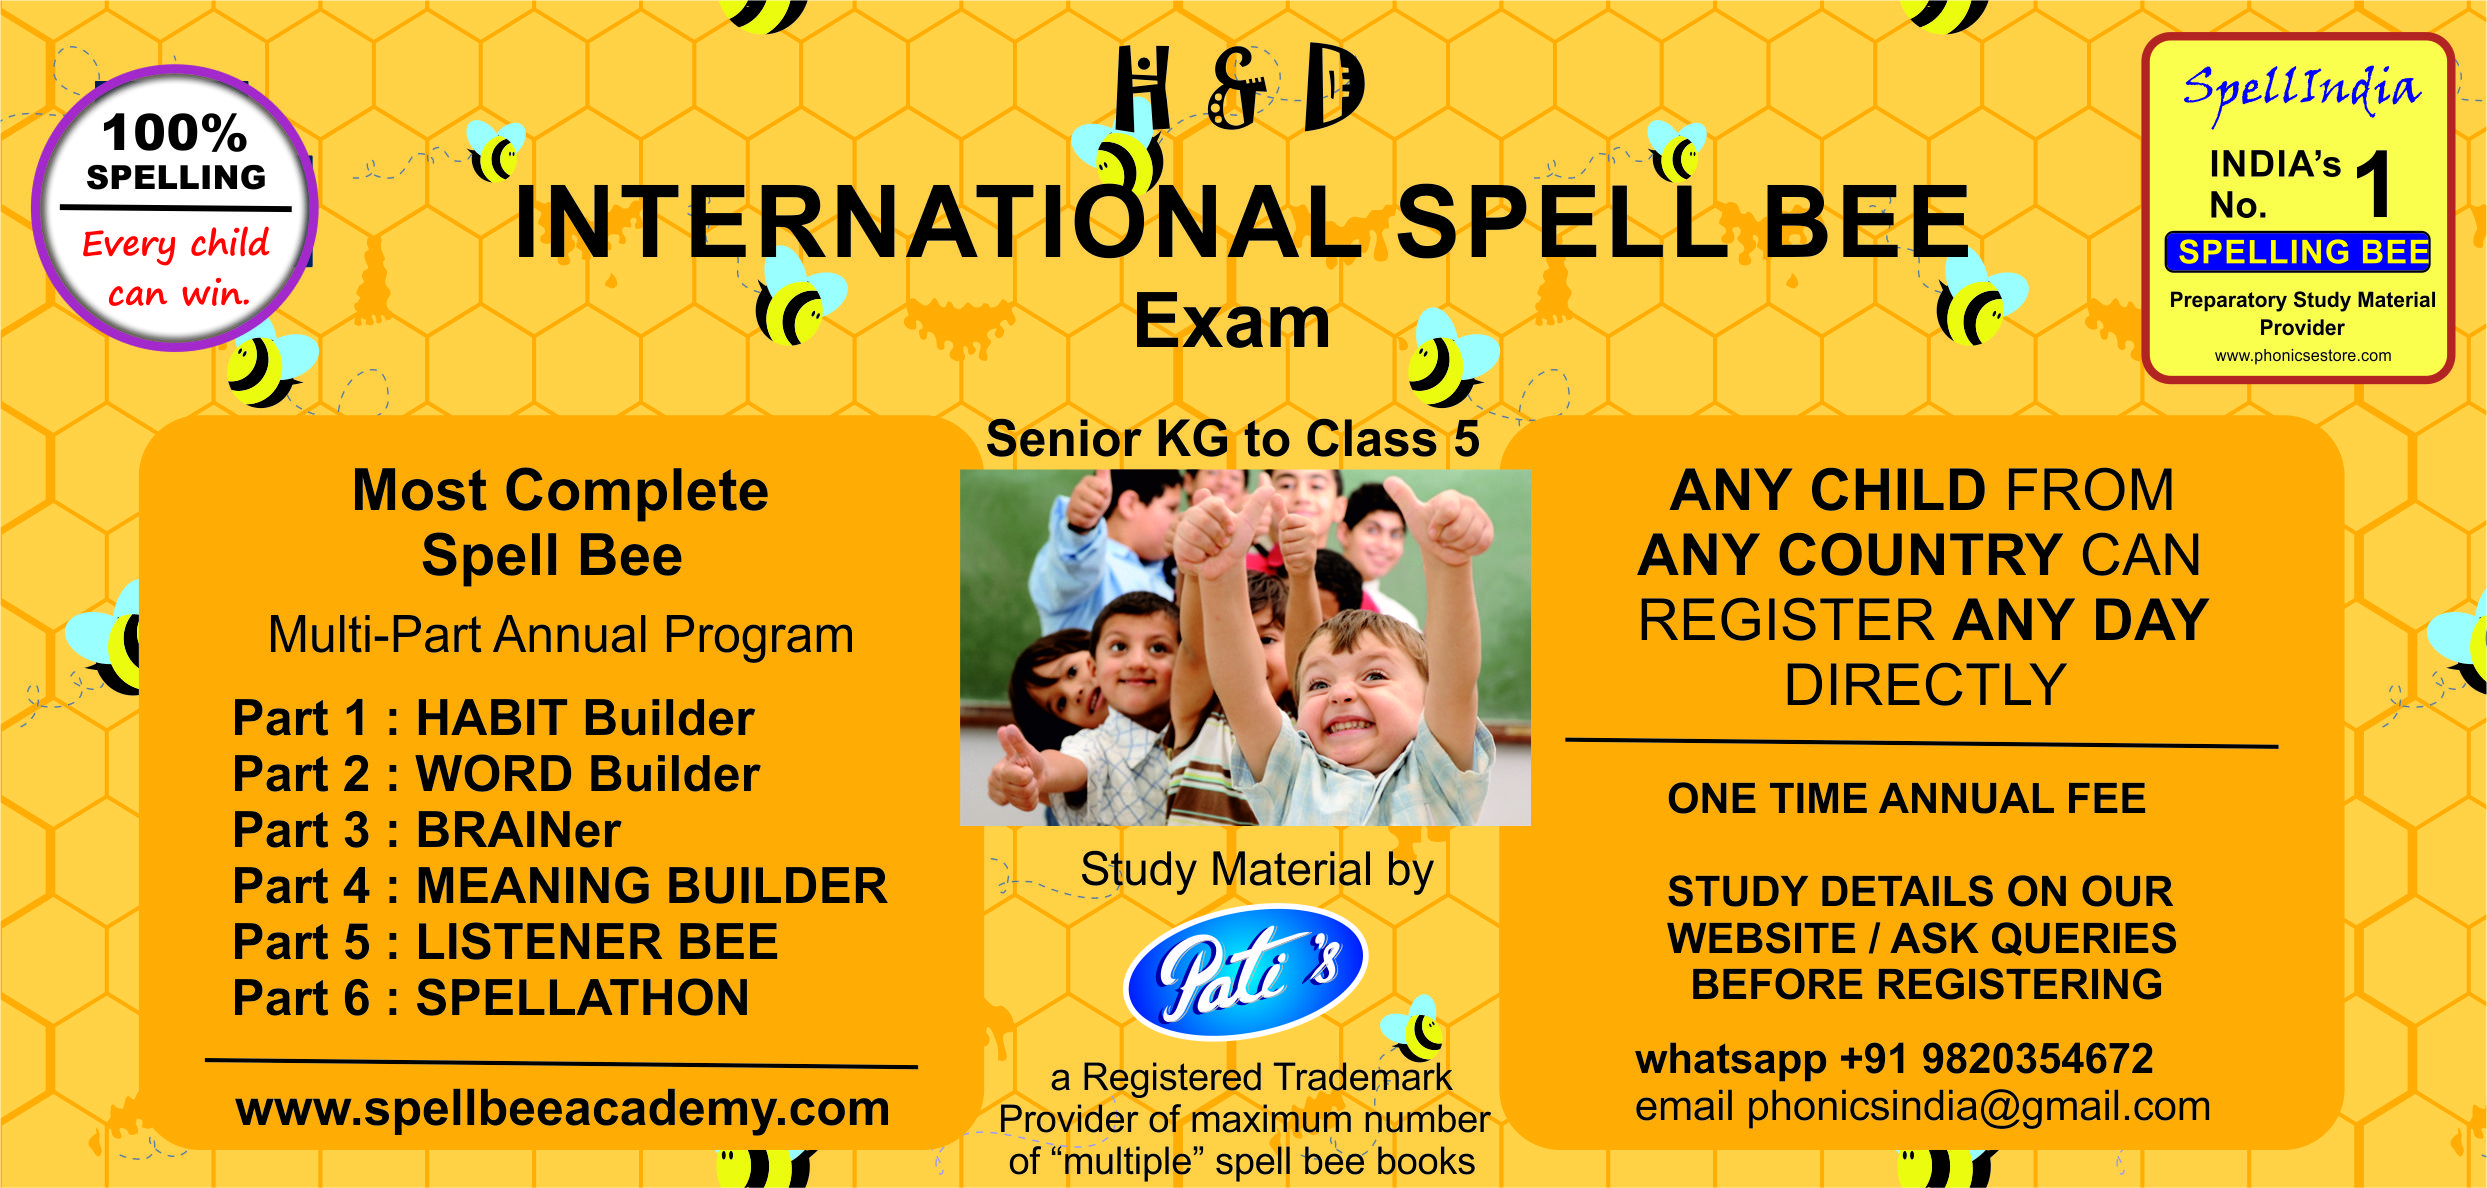 Spelling Competition EXAMS- International Spell Bee Exam